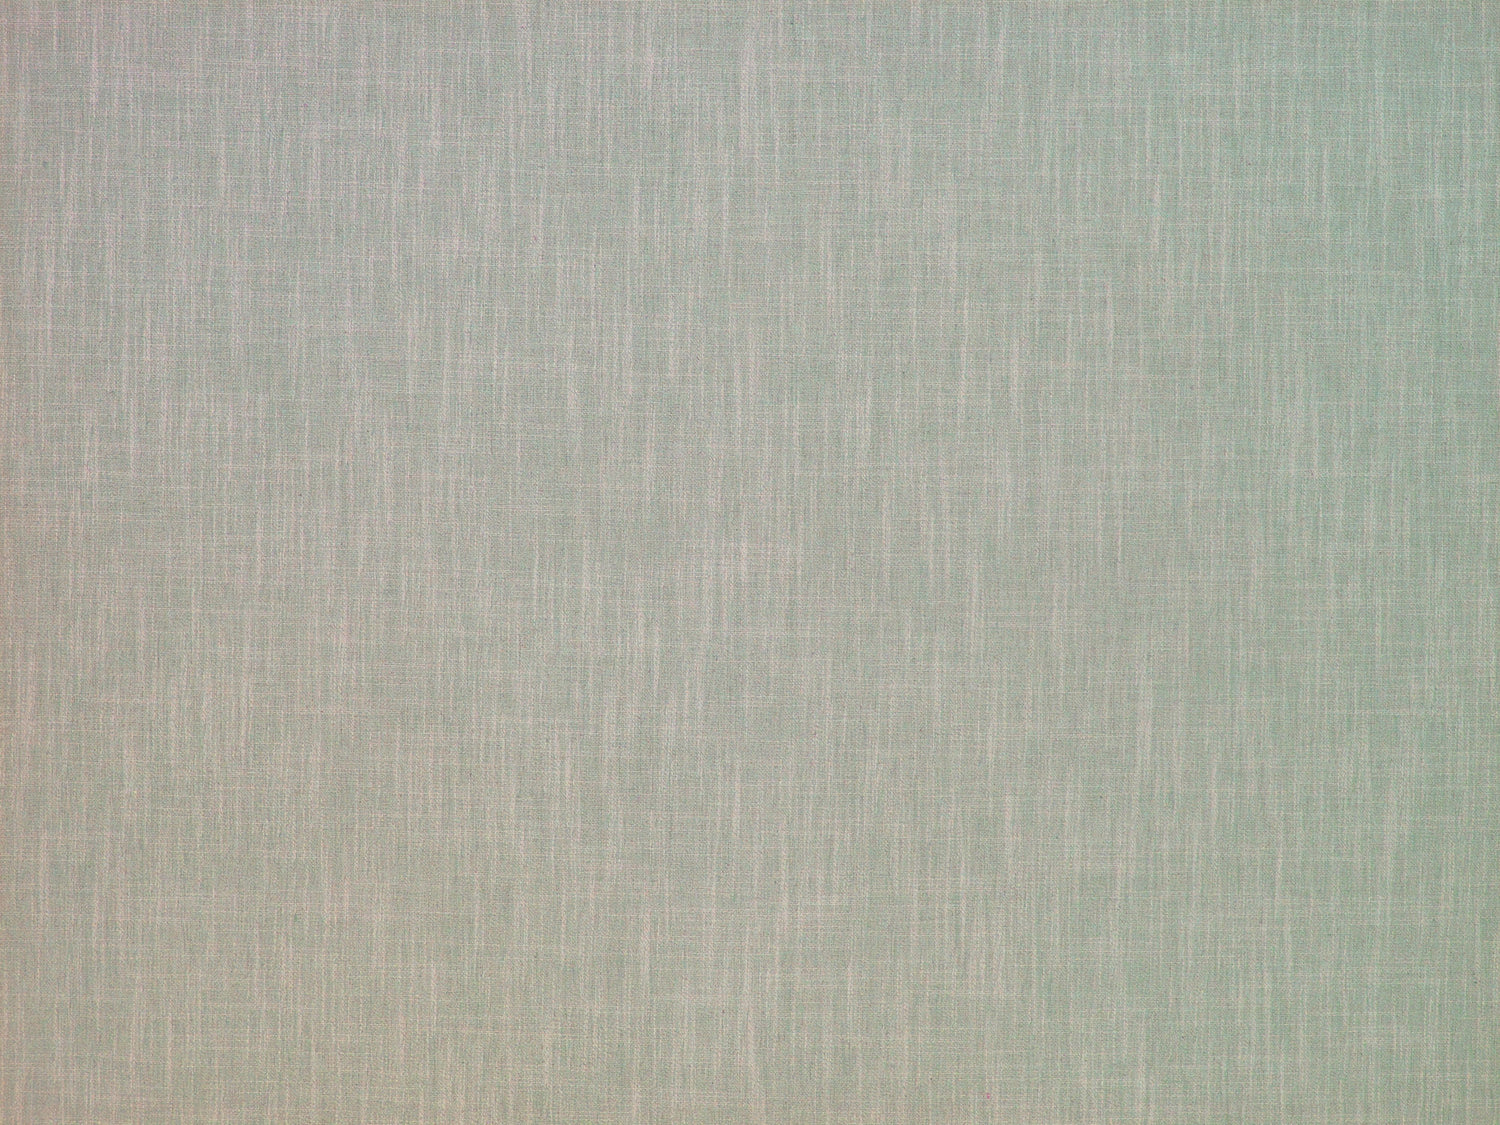 Flax fabric in blue mist color - pattern number H6 0018FLAX - by Scalamandre in the Old World Weavers collection